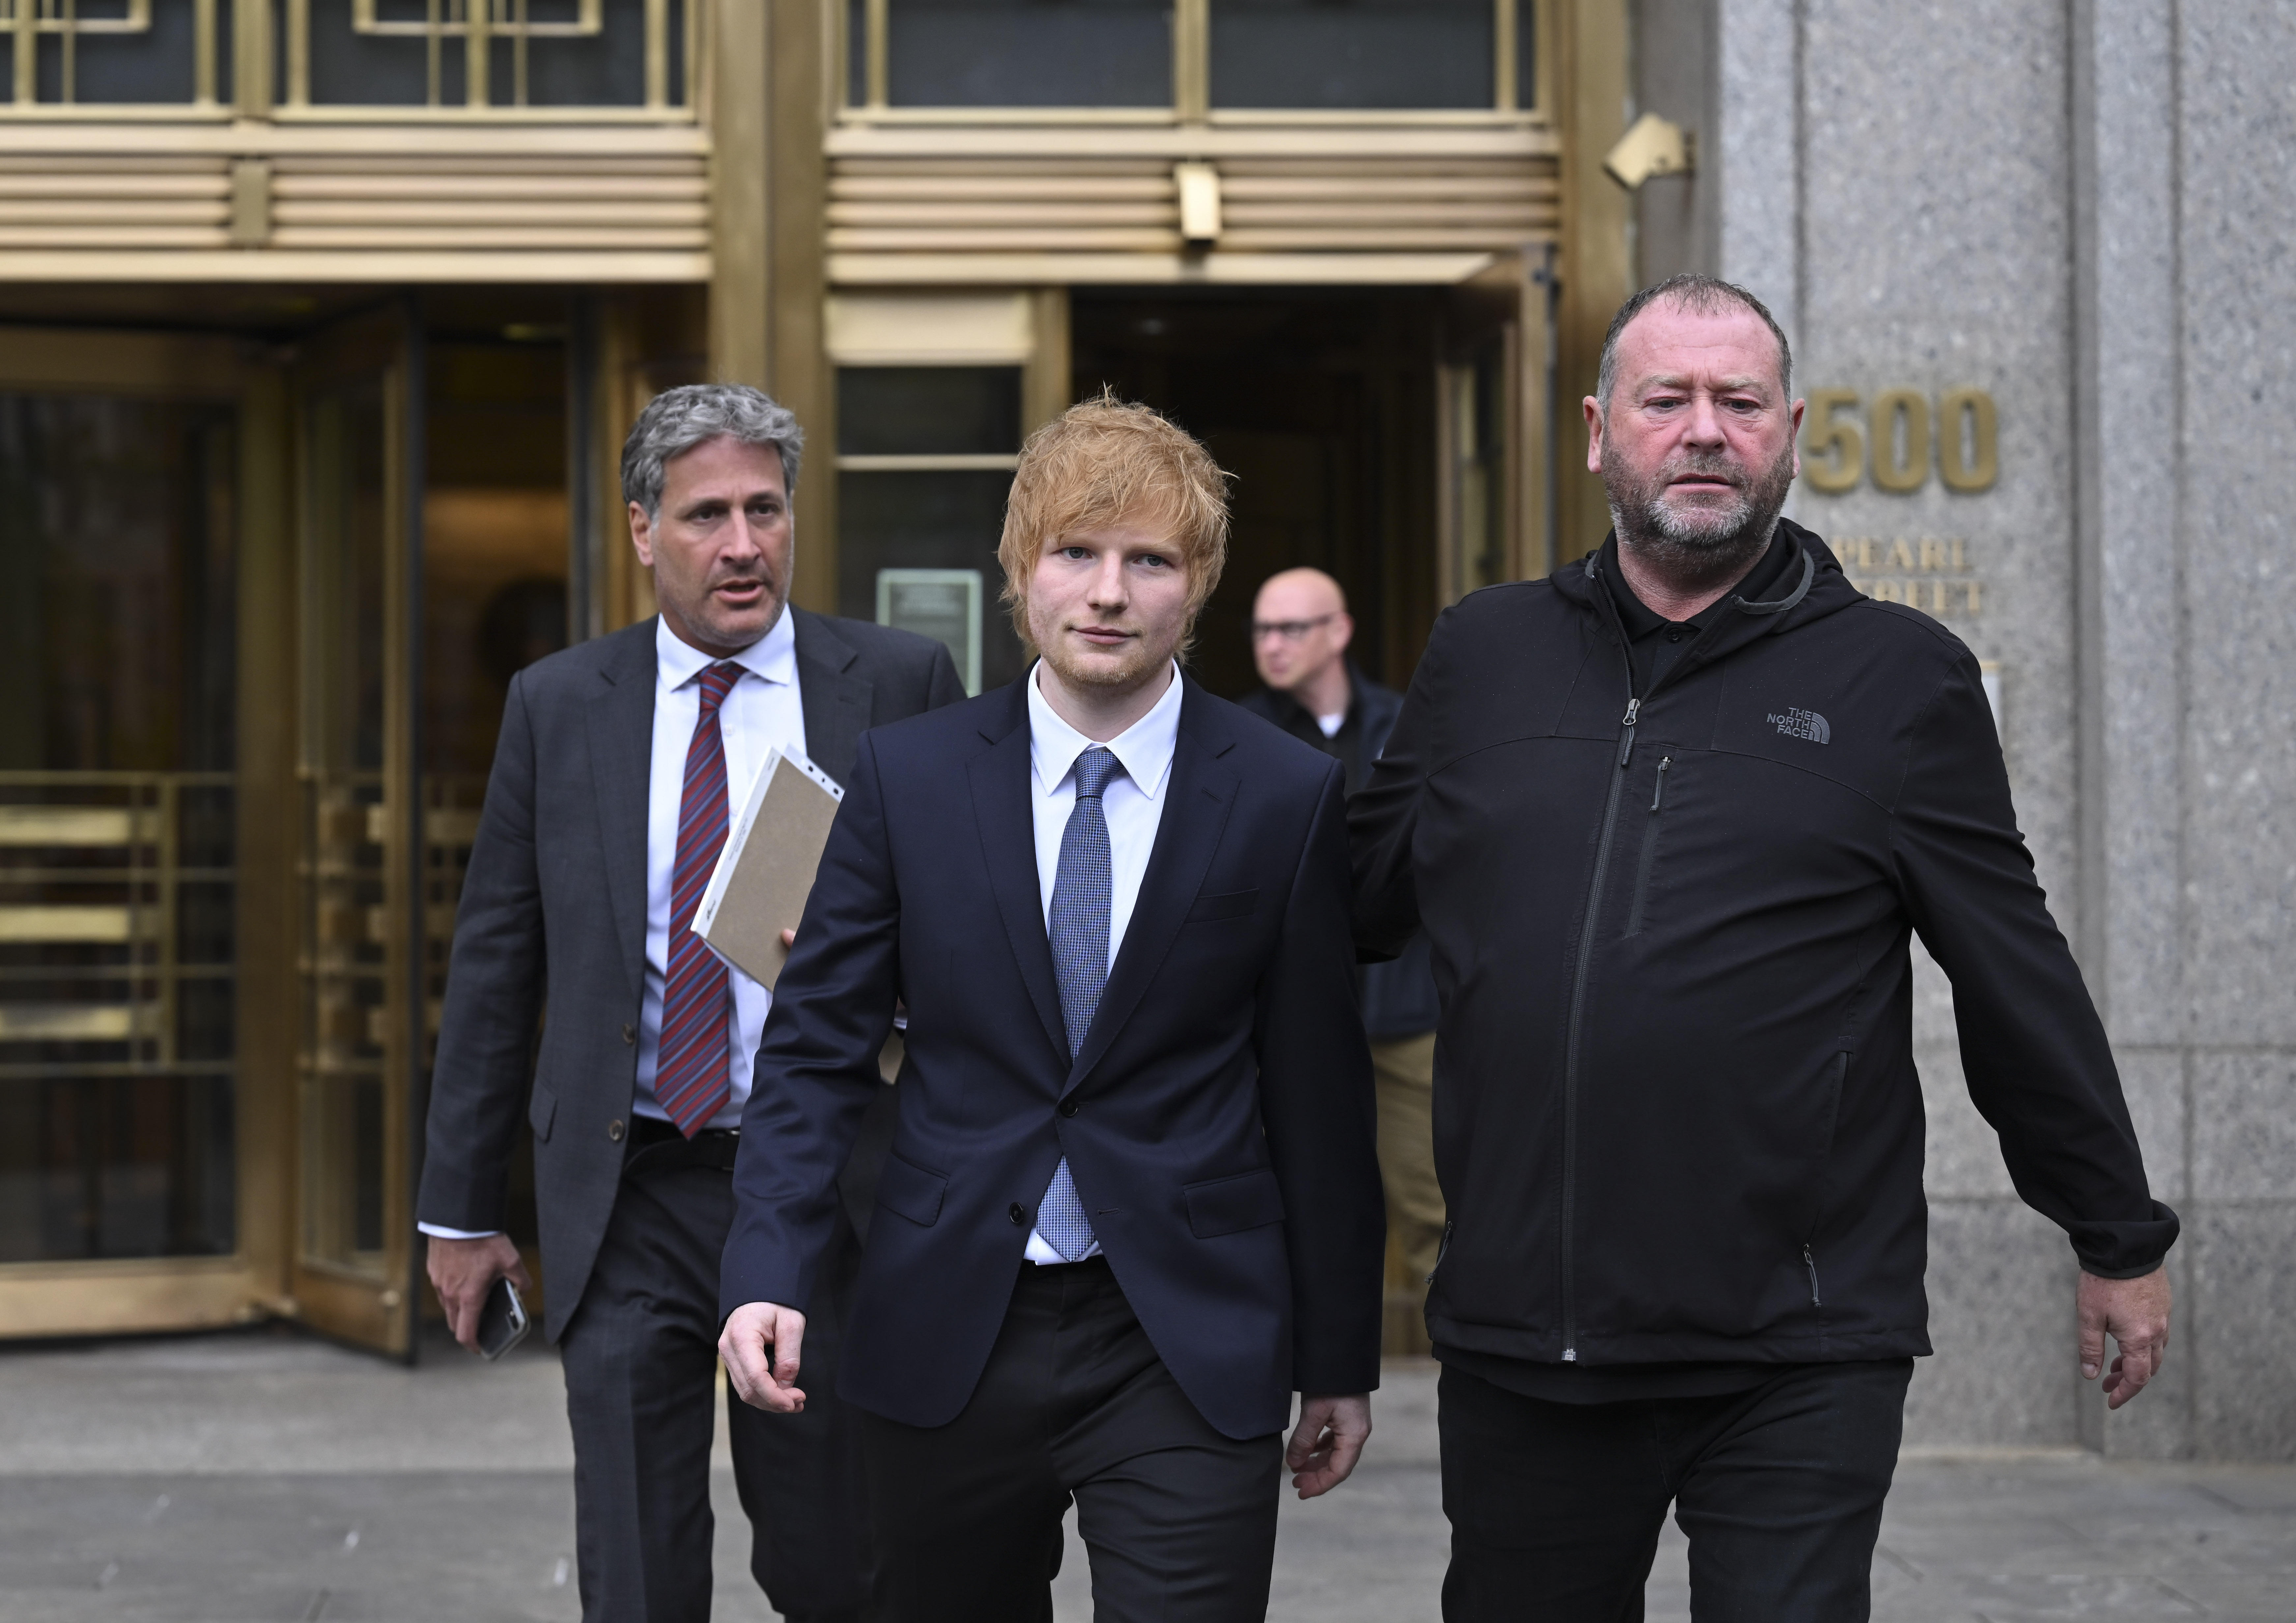 Ed Sheeran leaves the courthouse in NYC 